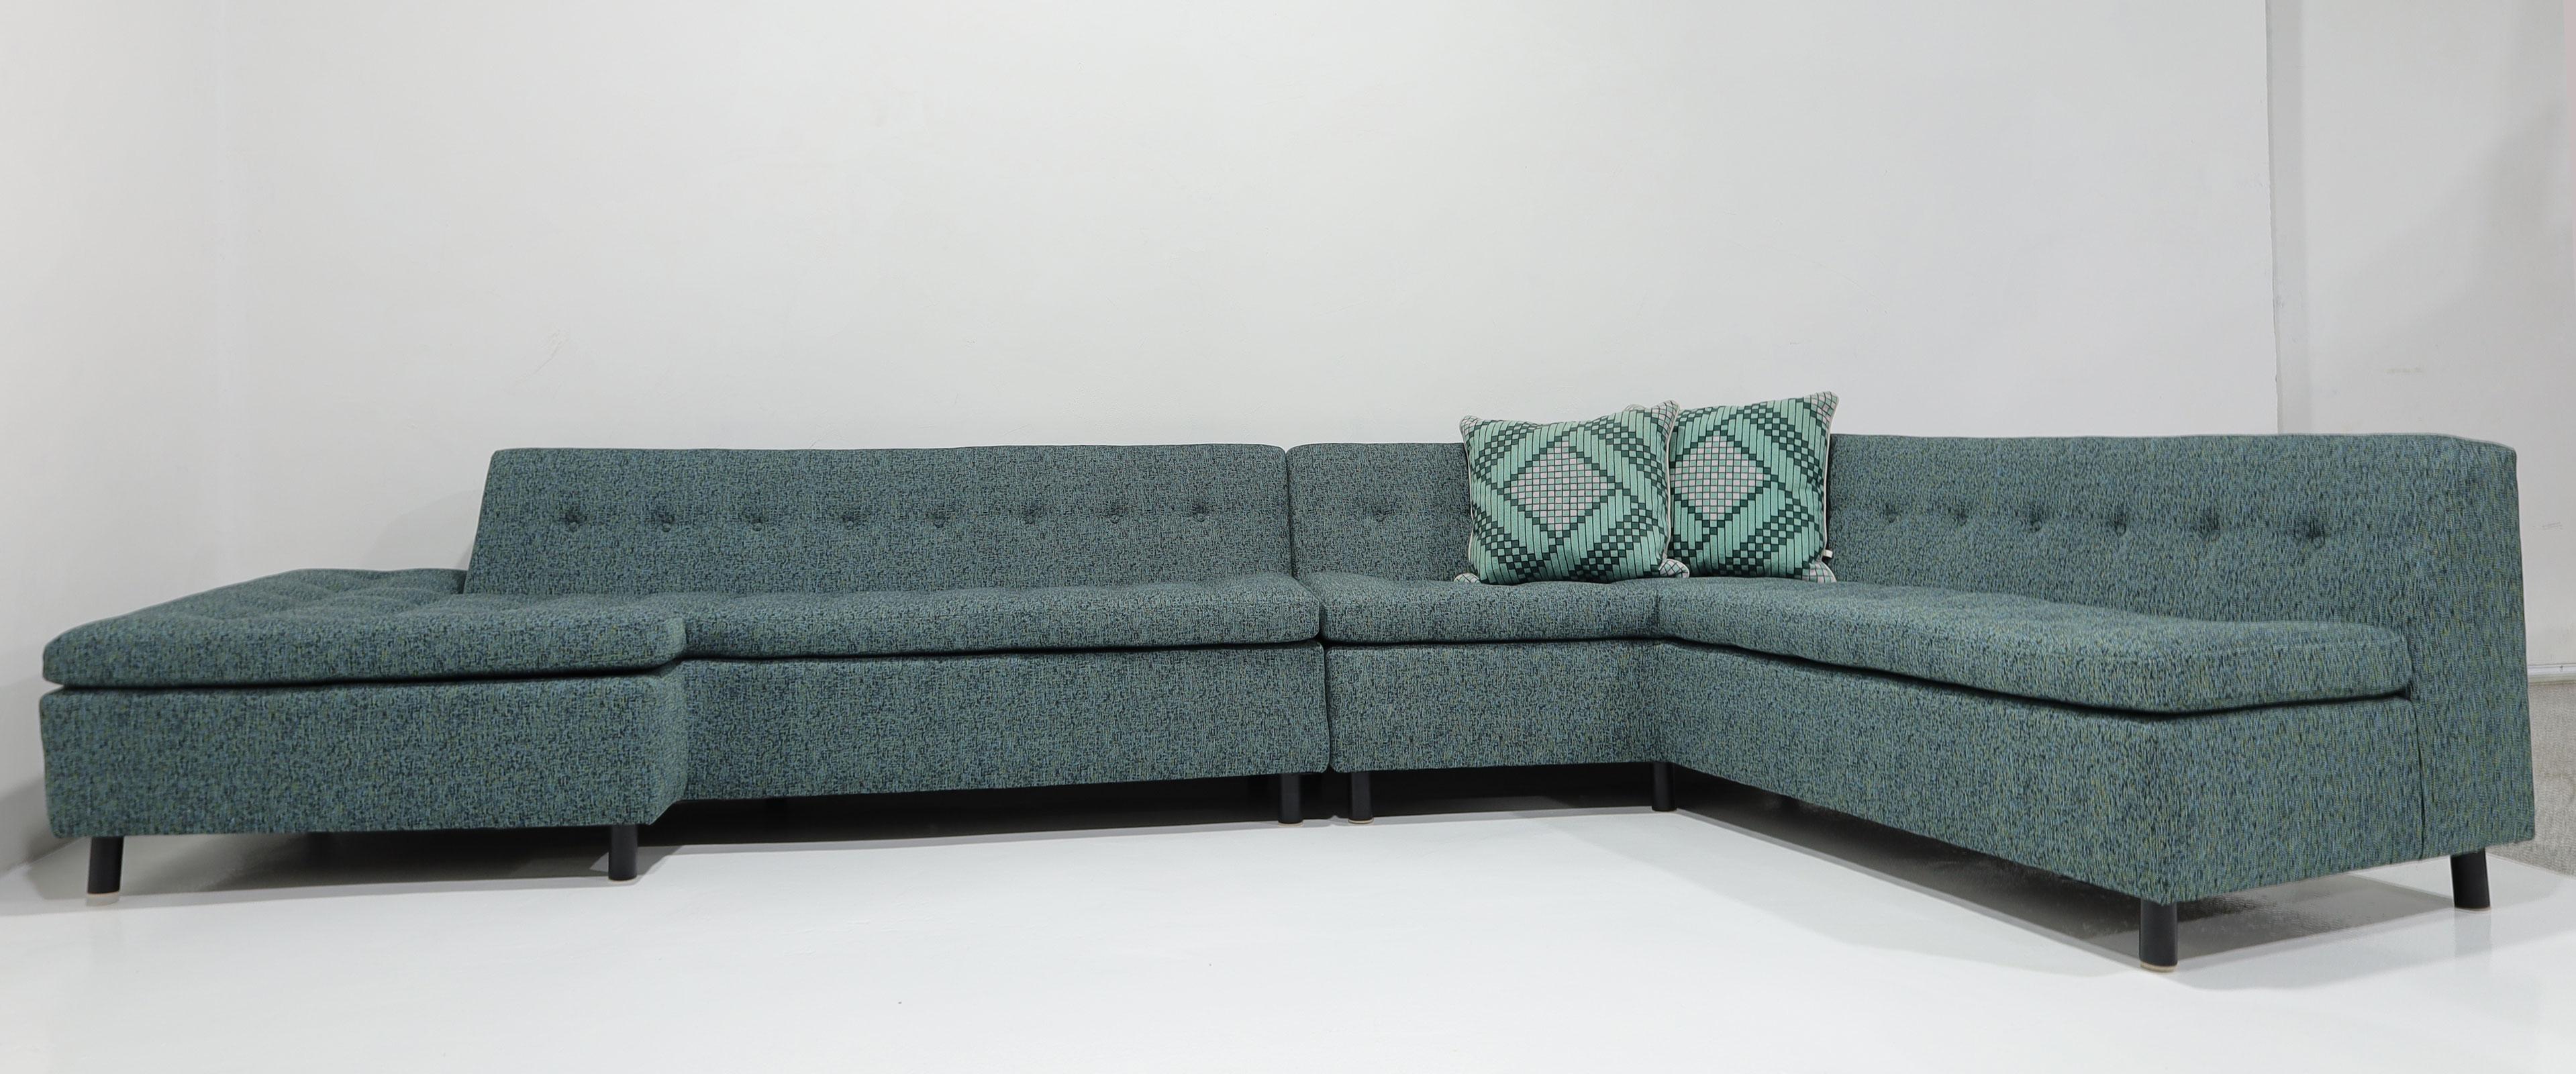 Harvey Probber Iconic Architectural Angle Sofa in Wool Upholstery For Sale 2